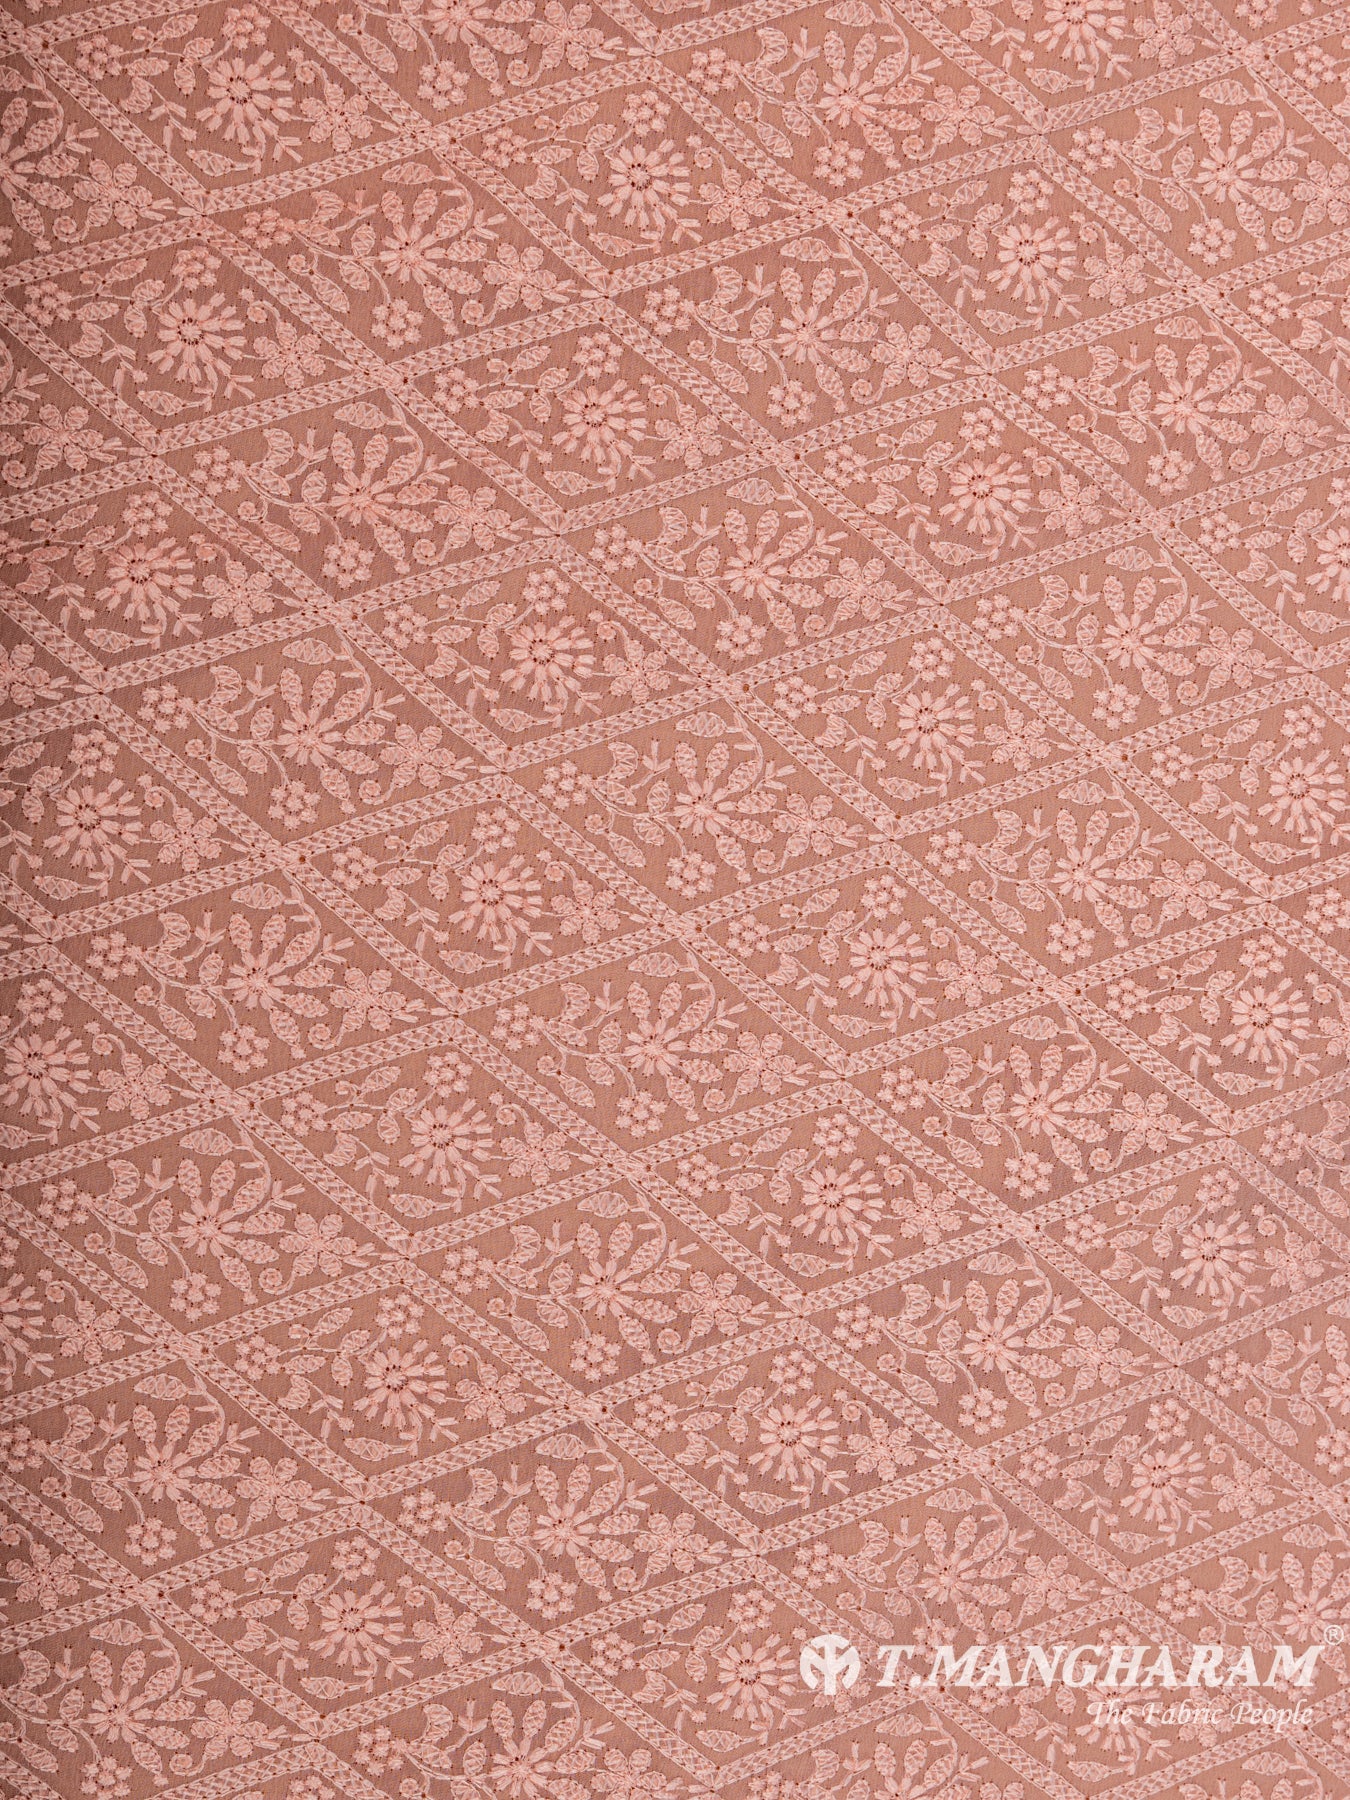 Peach Georgette Embroidery Fabric - EC6537 view-3